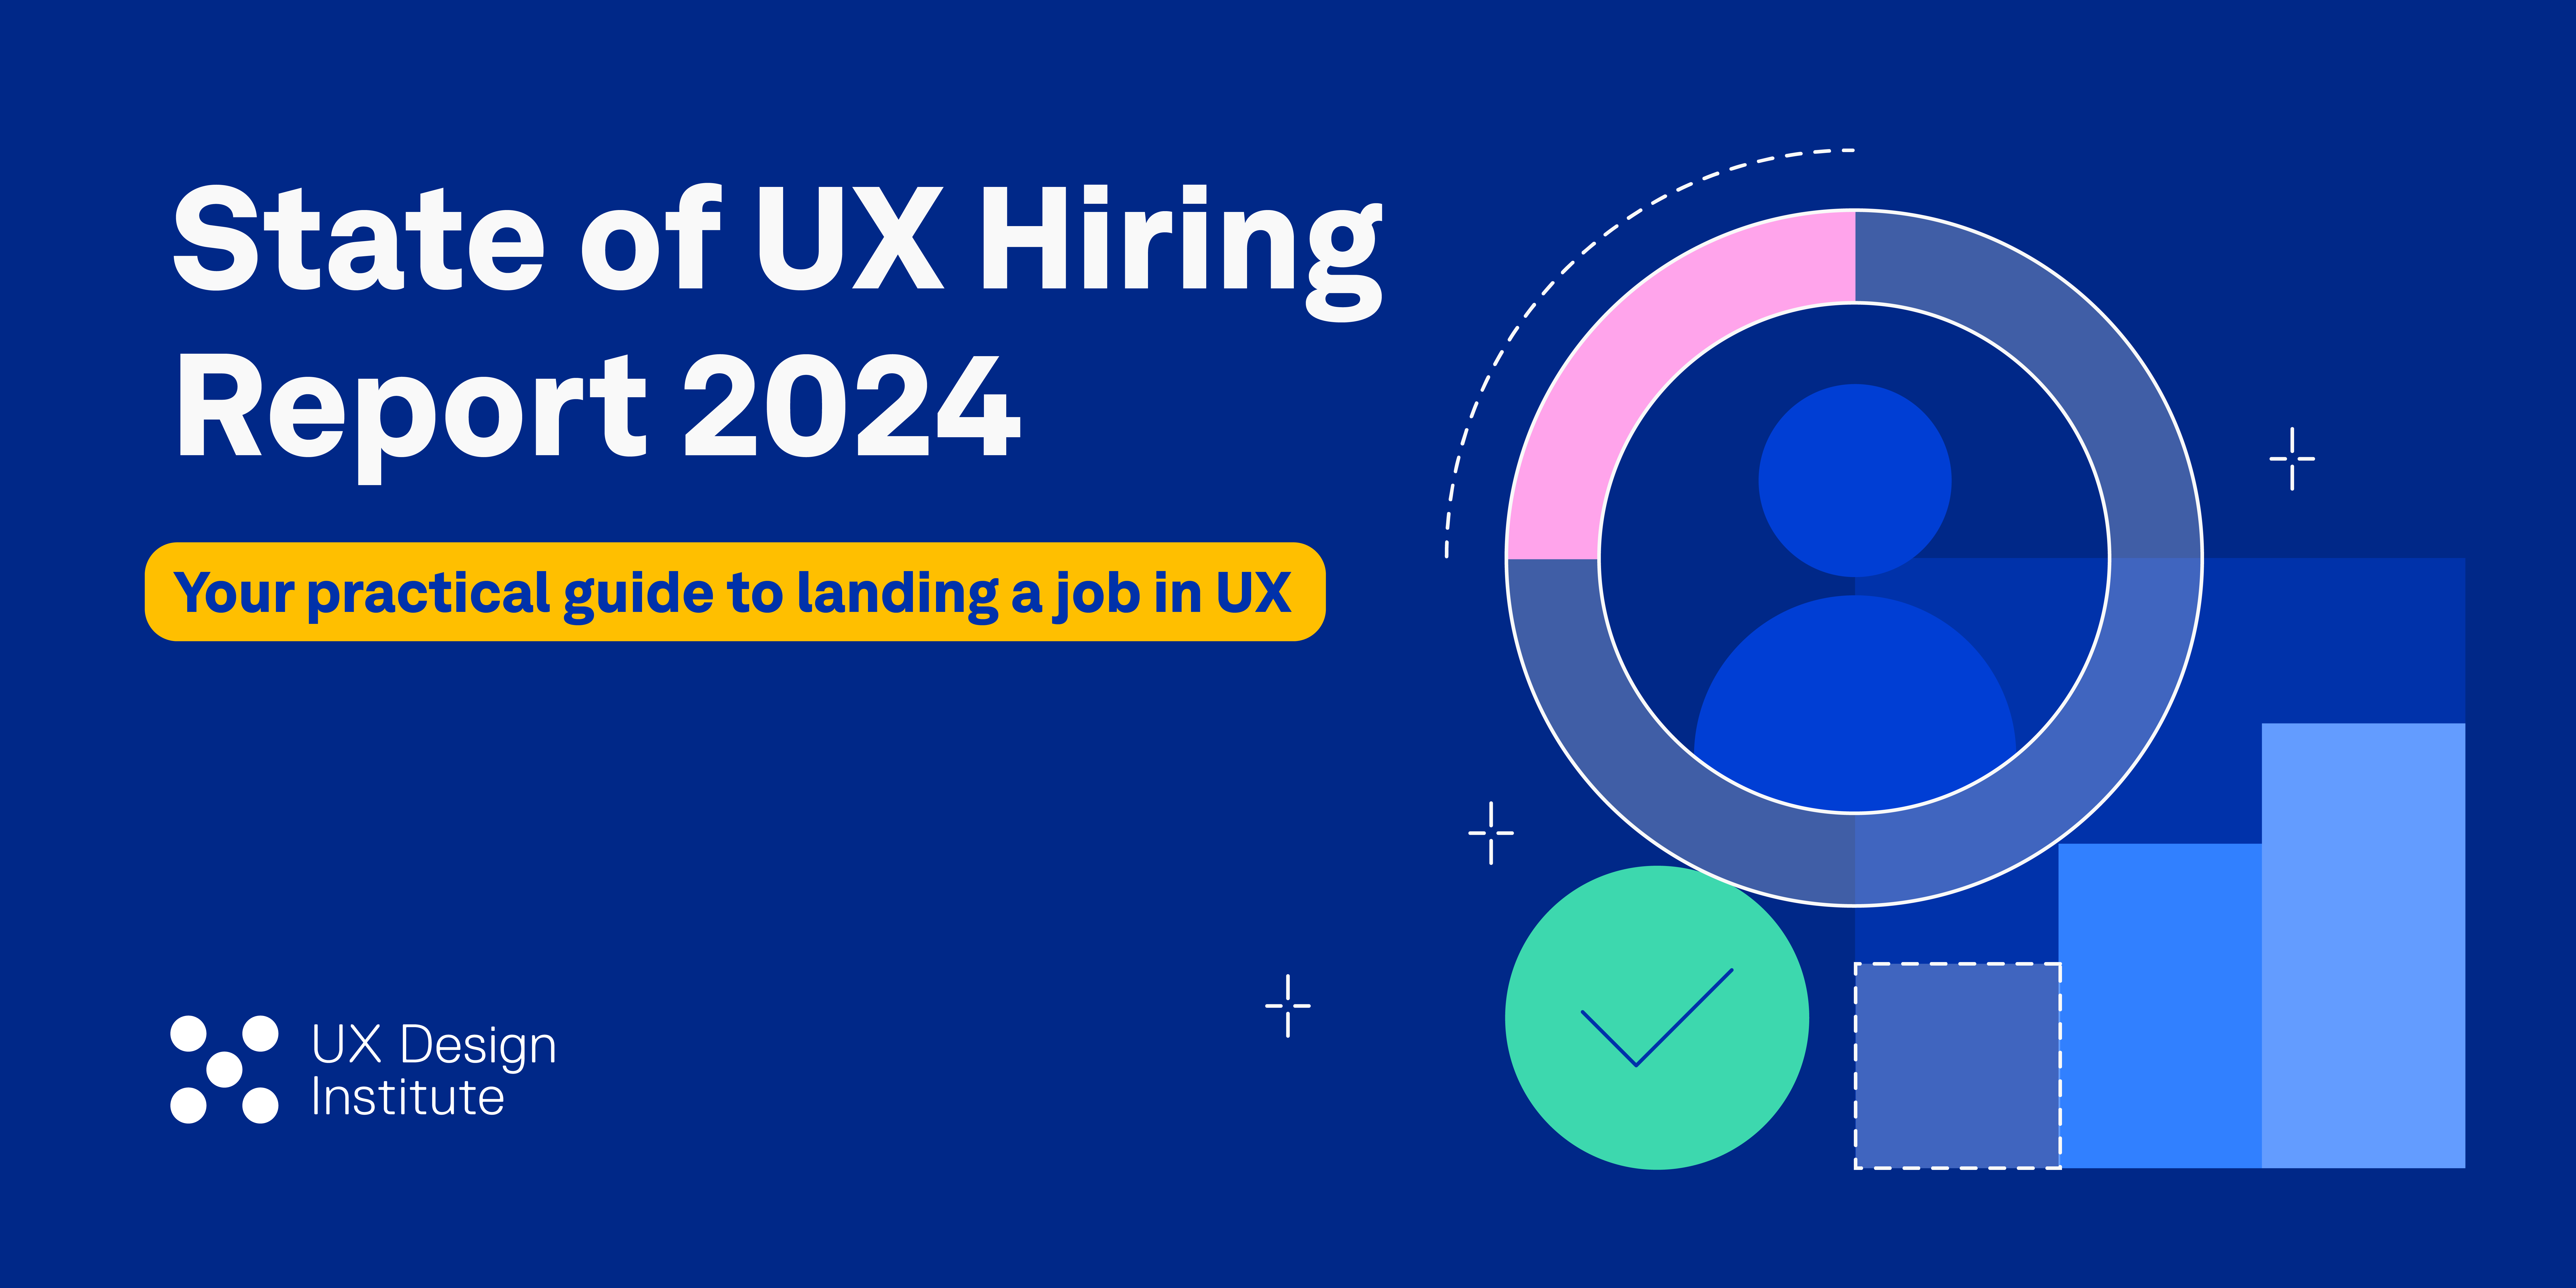 Your guide to landing a job in UX: Top insights from UX Design Institute’s State of UX Hiring Report 2024